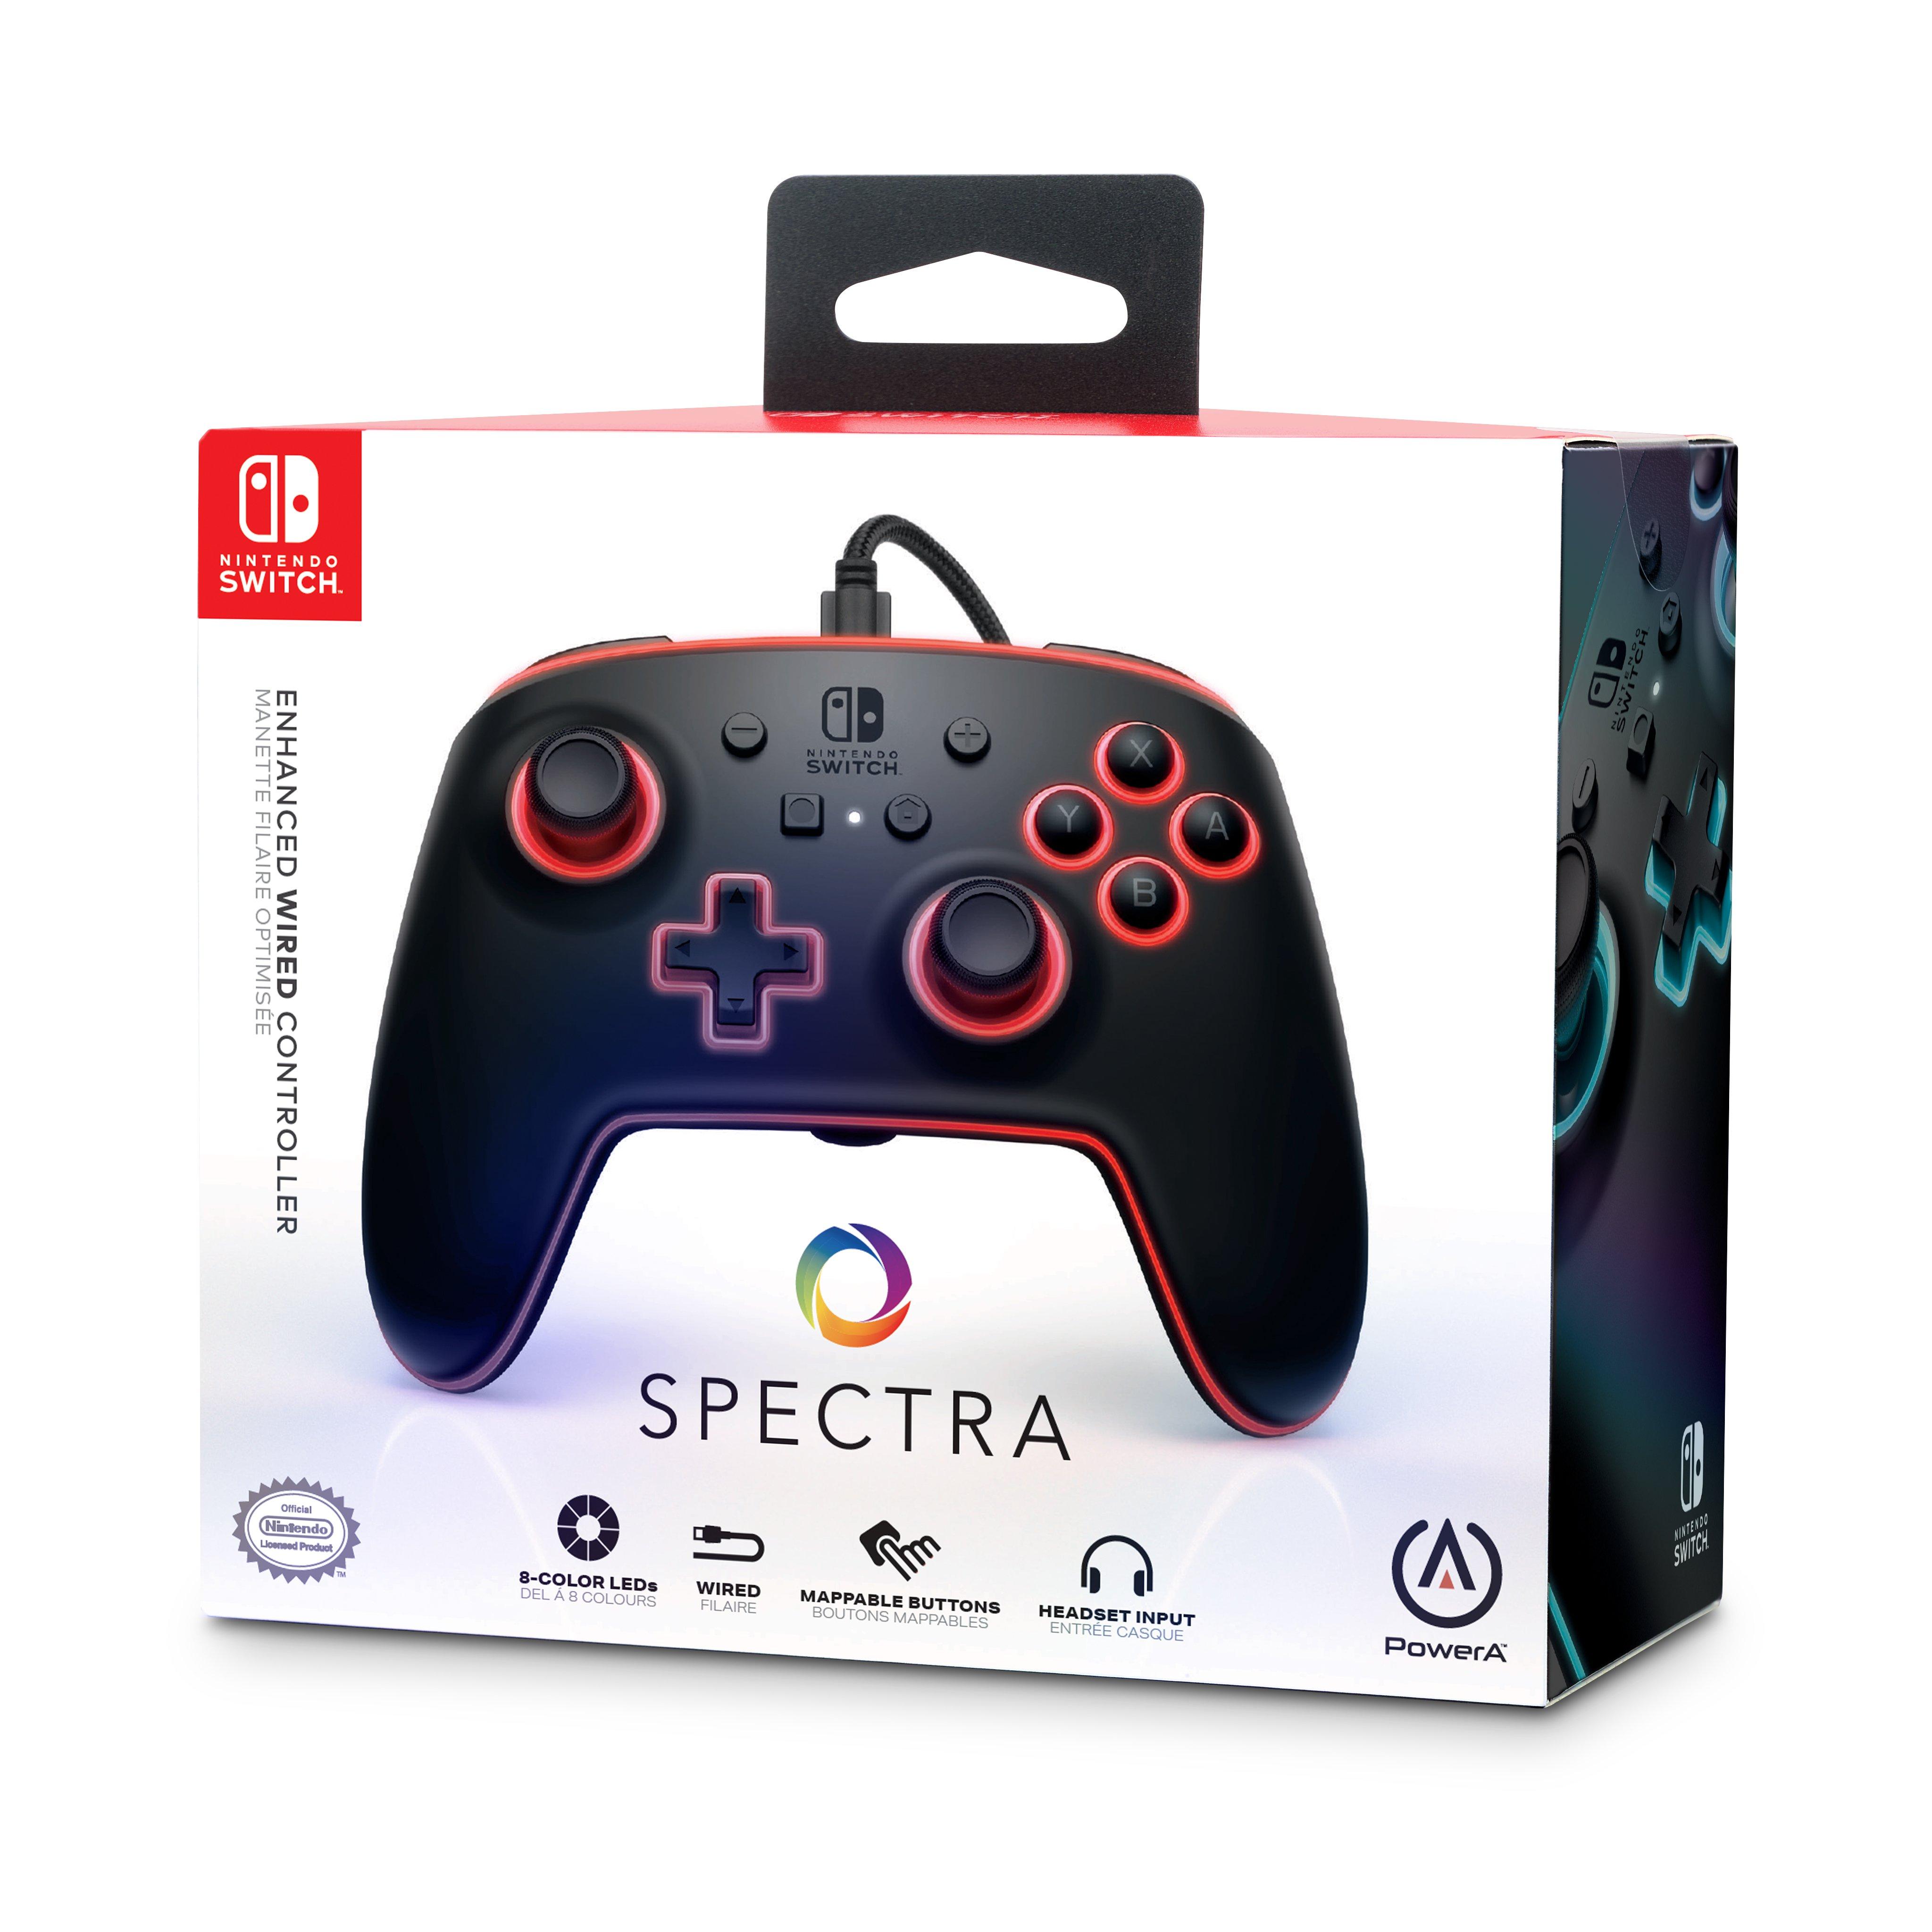  PowerA Spectra Enhanced Illuminated Wired Controller for Xbox  One, gamepad, video game, gaming controller, works with Xbox Series X